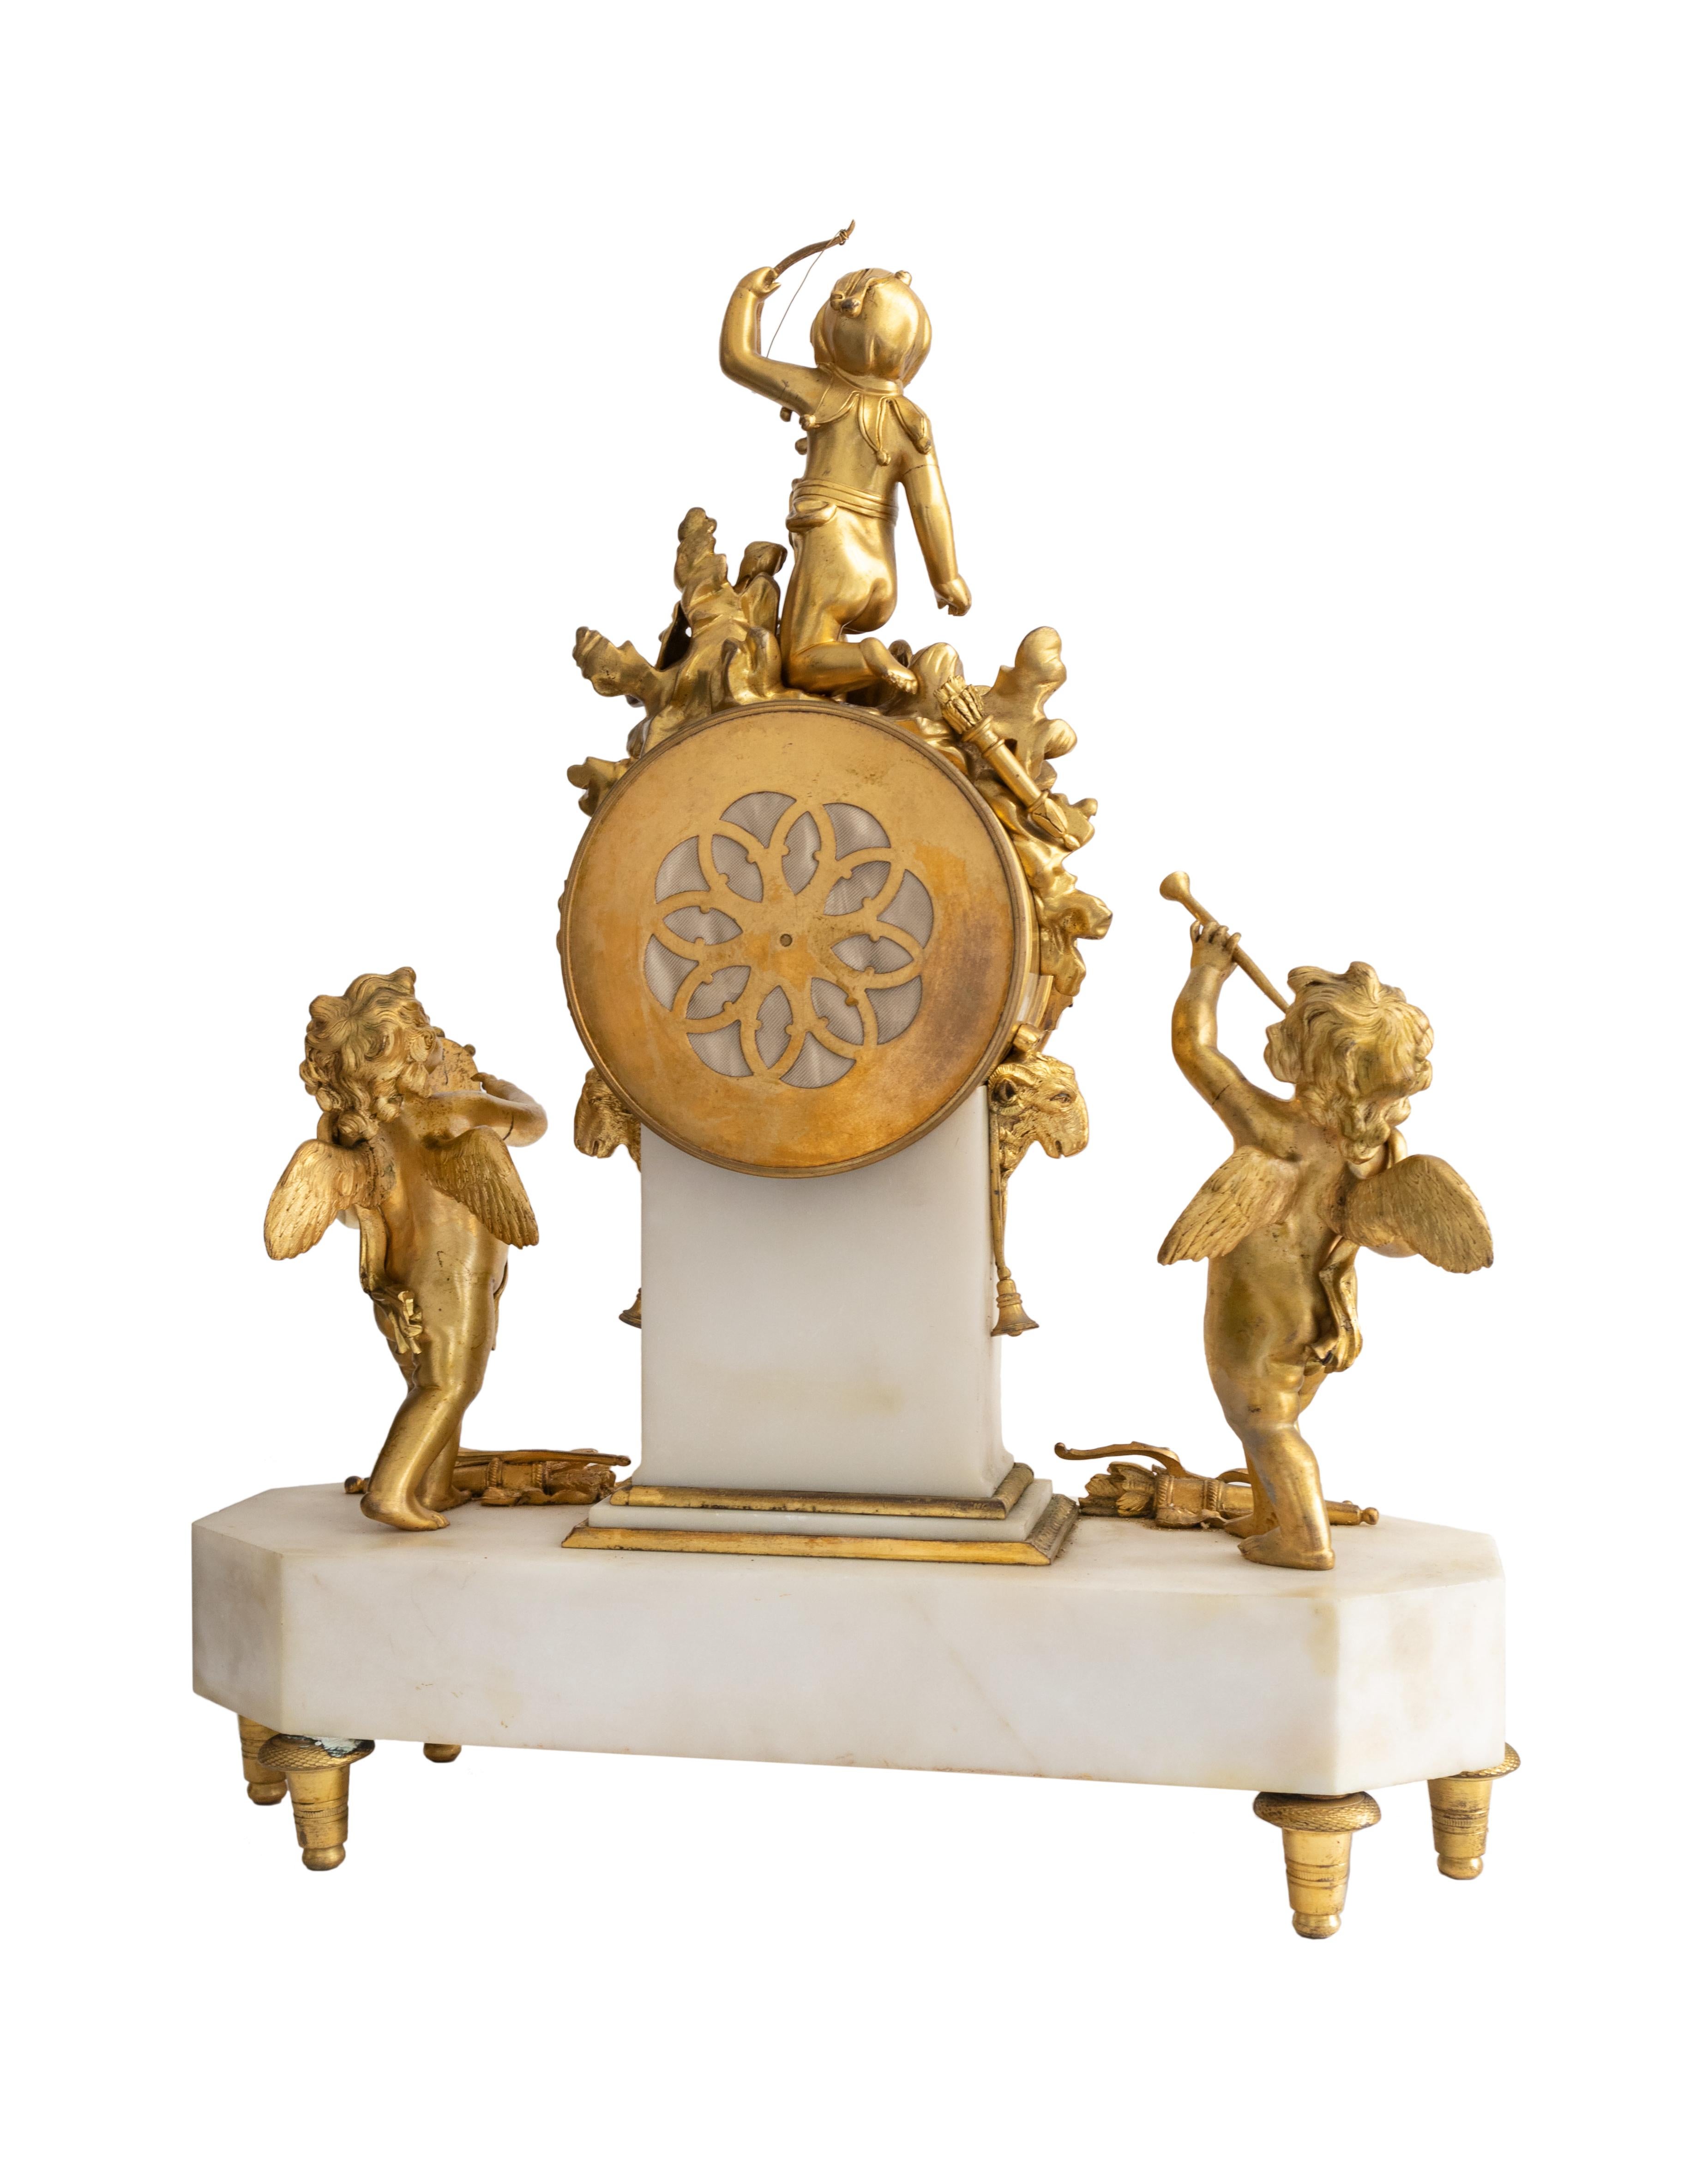 Louis XVI gilded bronze watch. Enamelled dial with hollow hands
White marble pedestal richly decorated with gilded bronze, and in the center a bas-relief with an ibex / goat symbol of Bacchus.
Zeus turns his illegitimate son Dionysus / Bacchus into